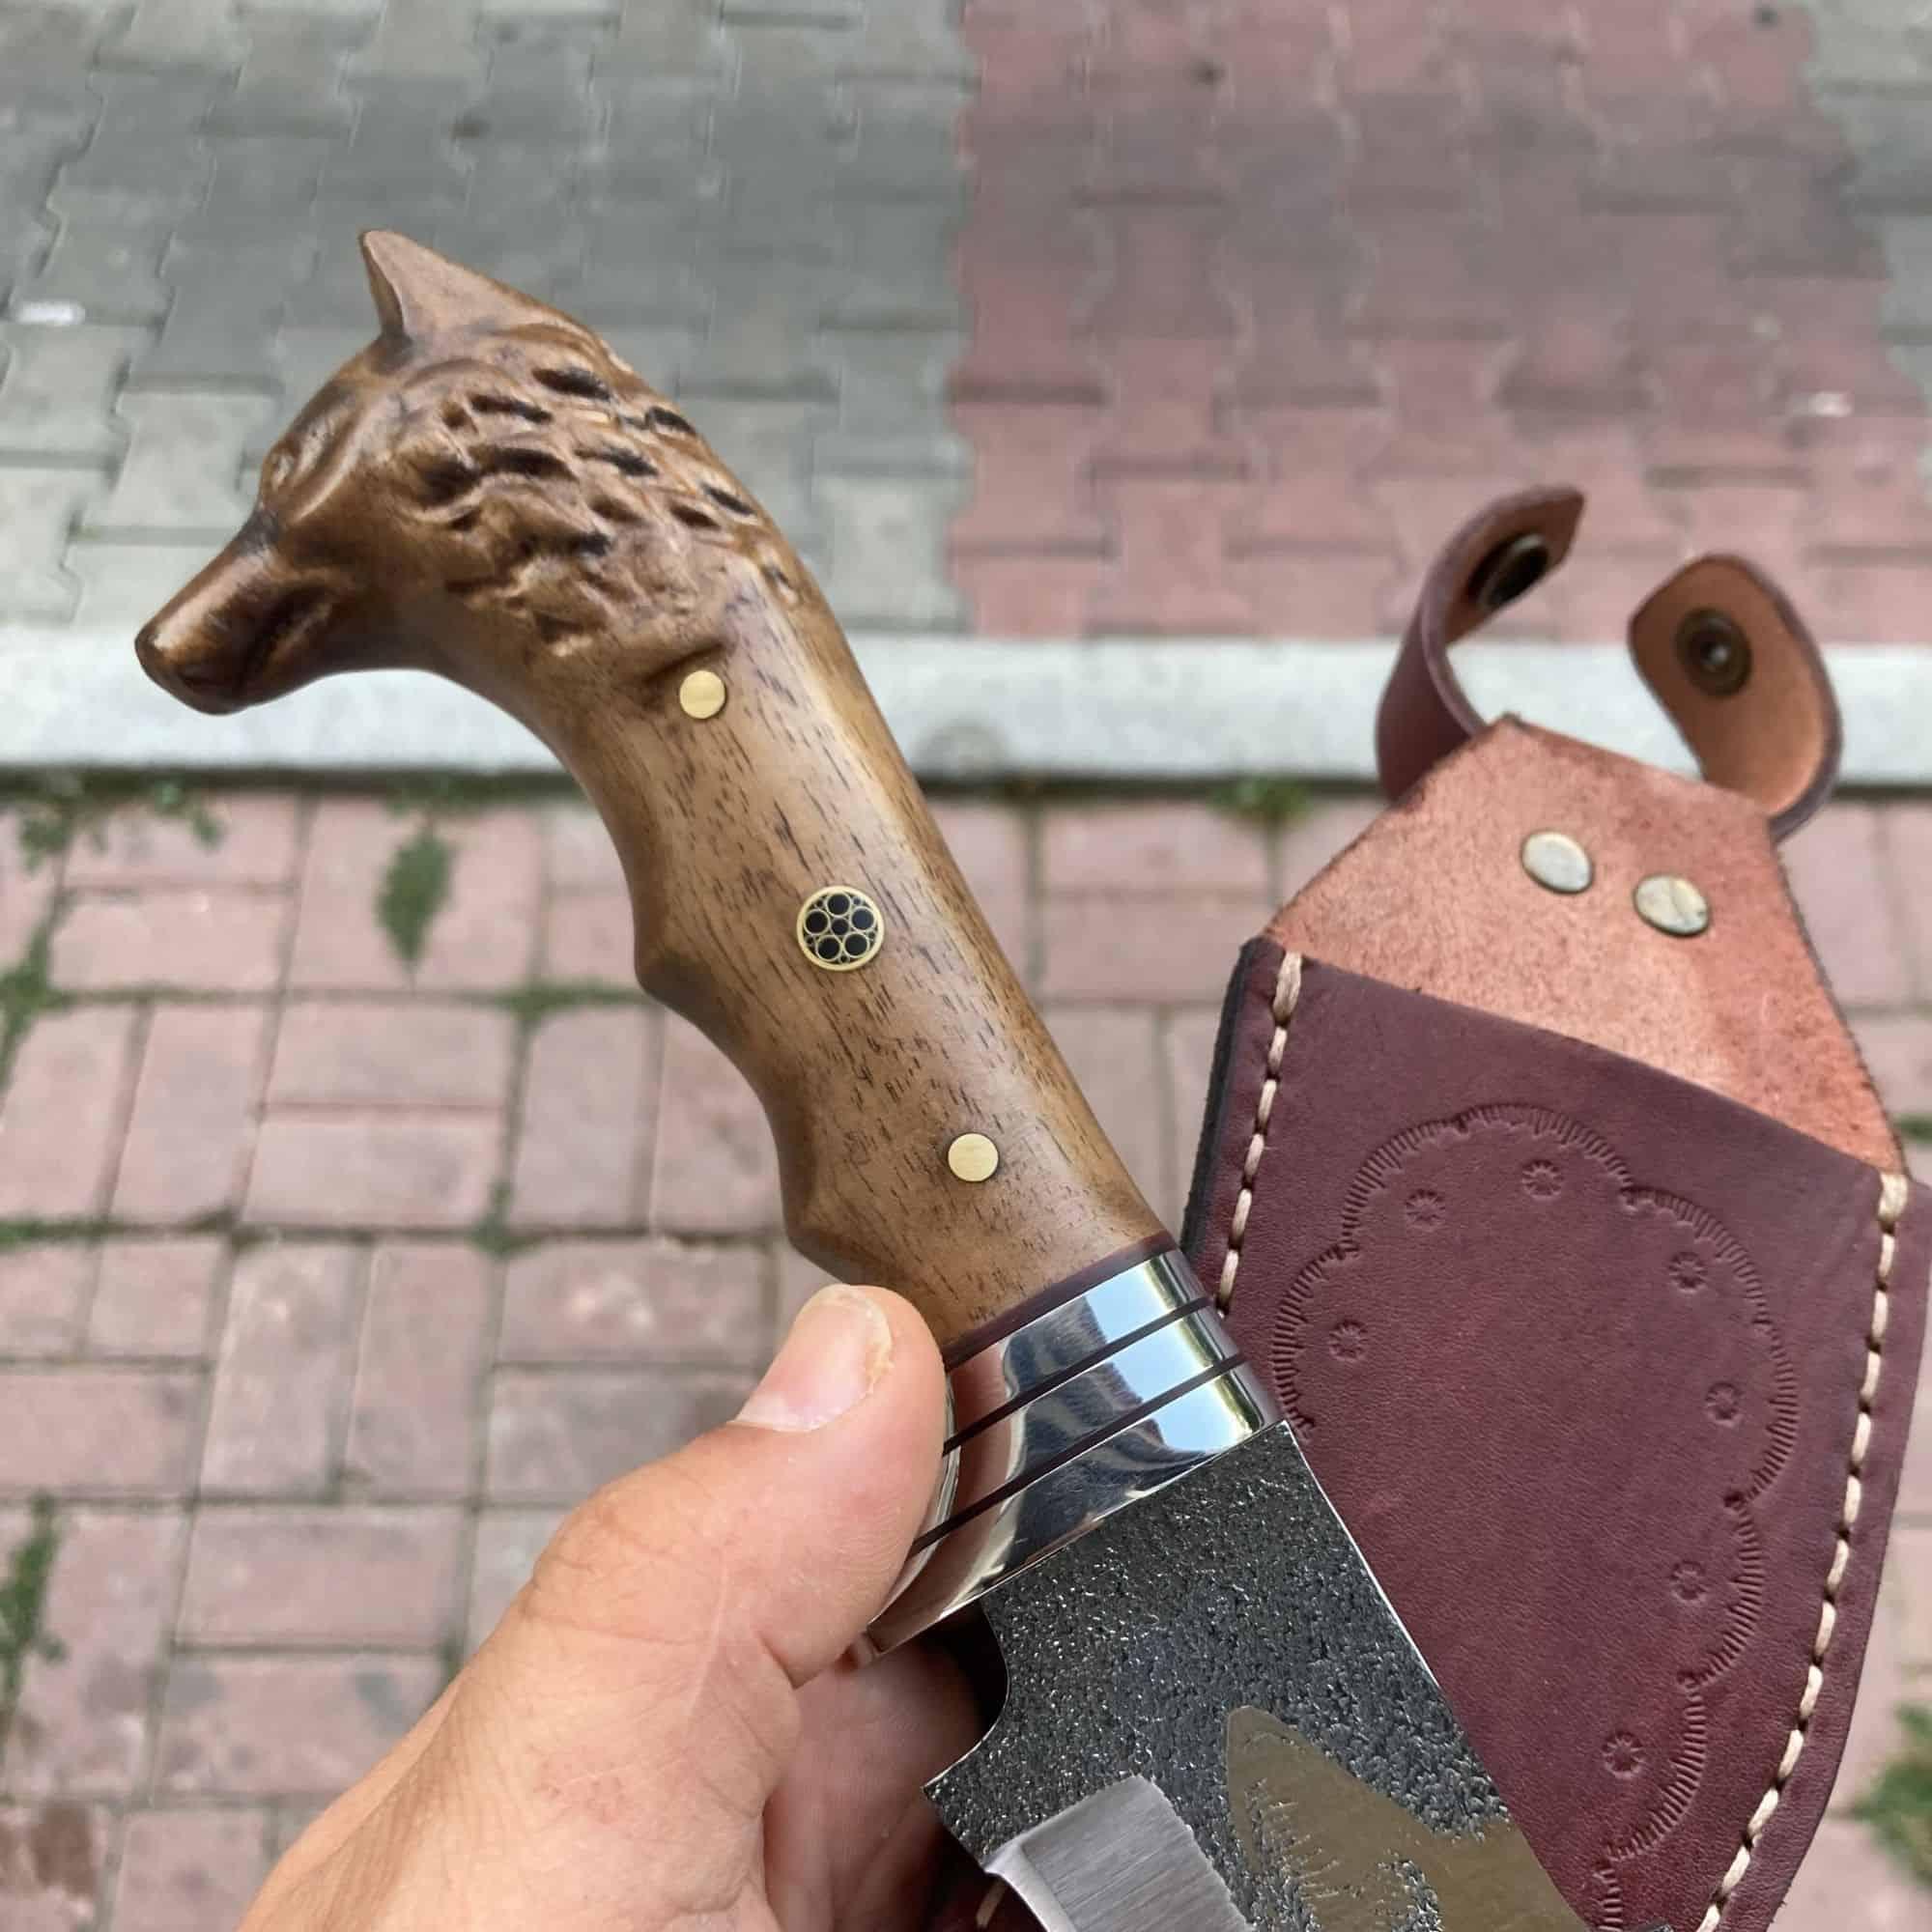 Genuine Leather Sheath, Wolf head Handle Engraving Hunting Knife Fixed Blade Hand Forged Survival Knife Camping Knives Gift For Men (11)